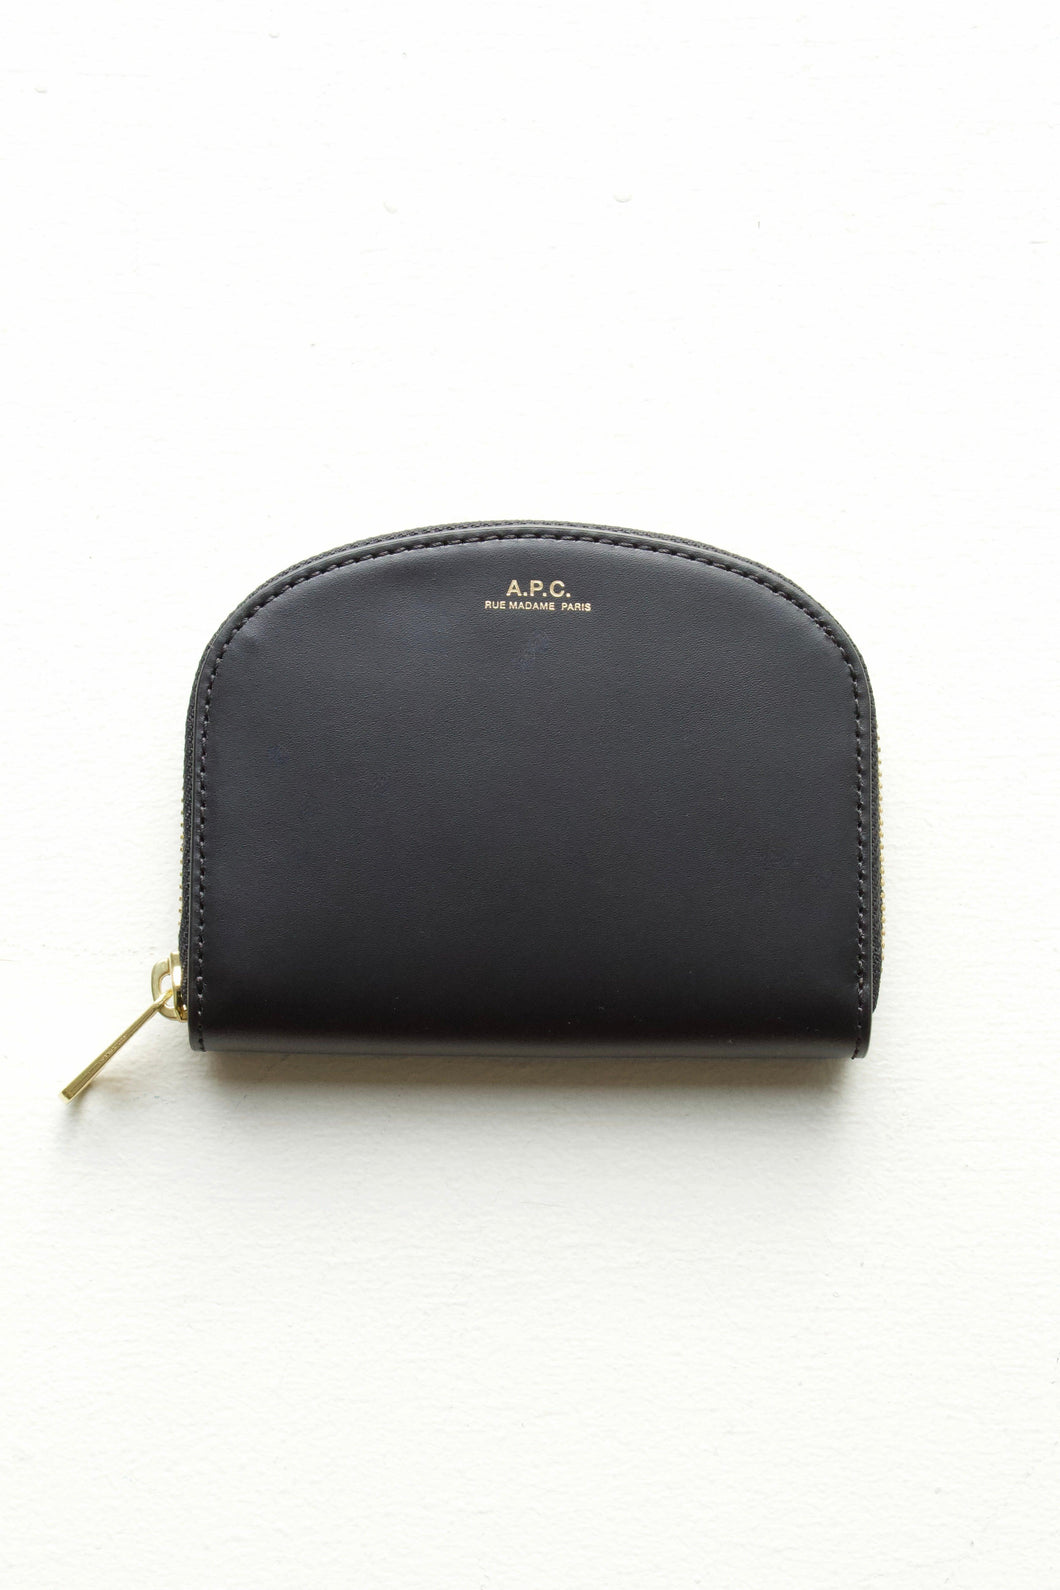 A.P.C Demi-Lune Coin Wallet in Black: this wallet is a true onyx black in a smooth matte finish